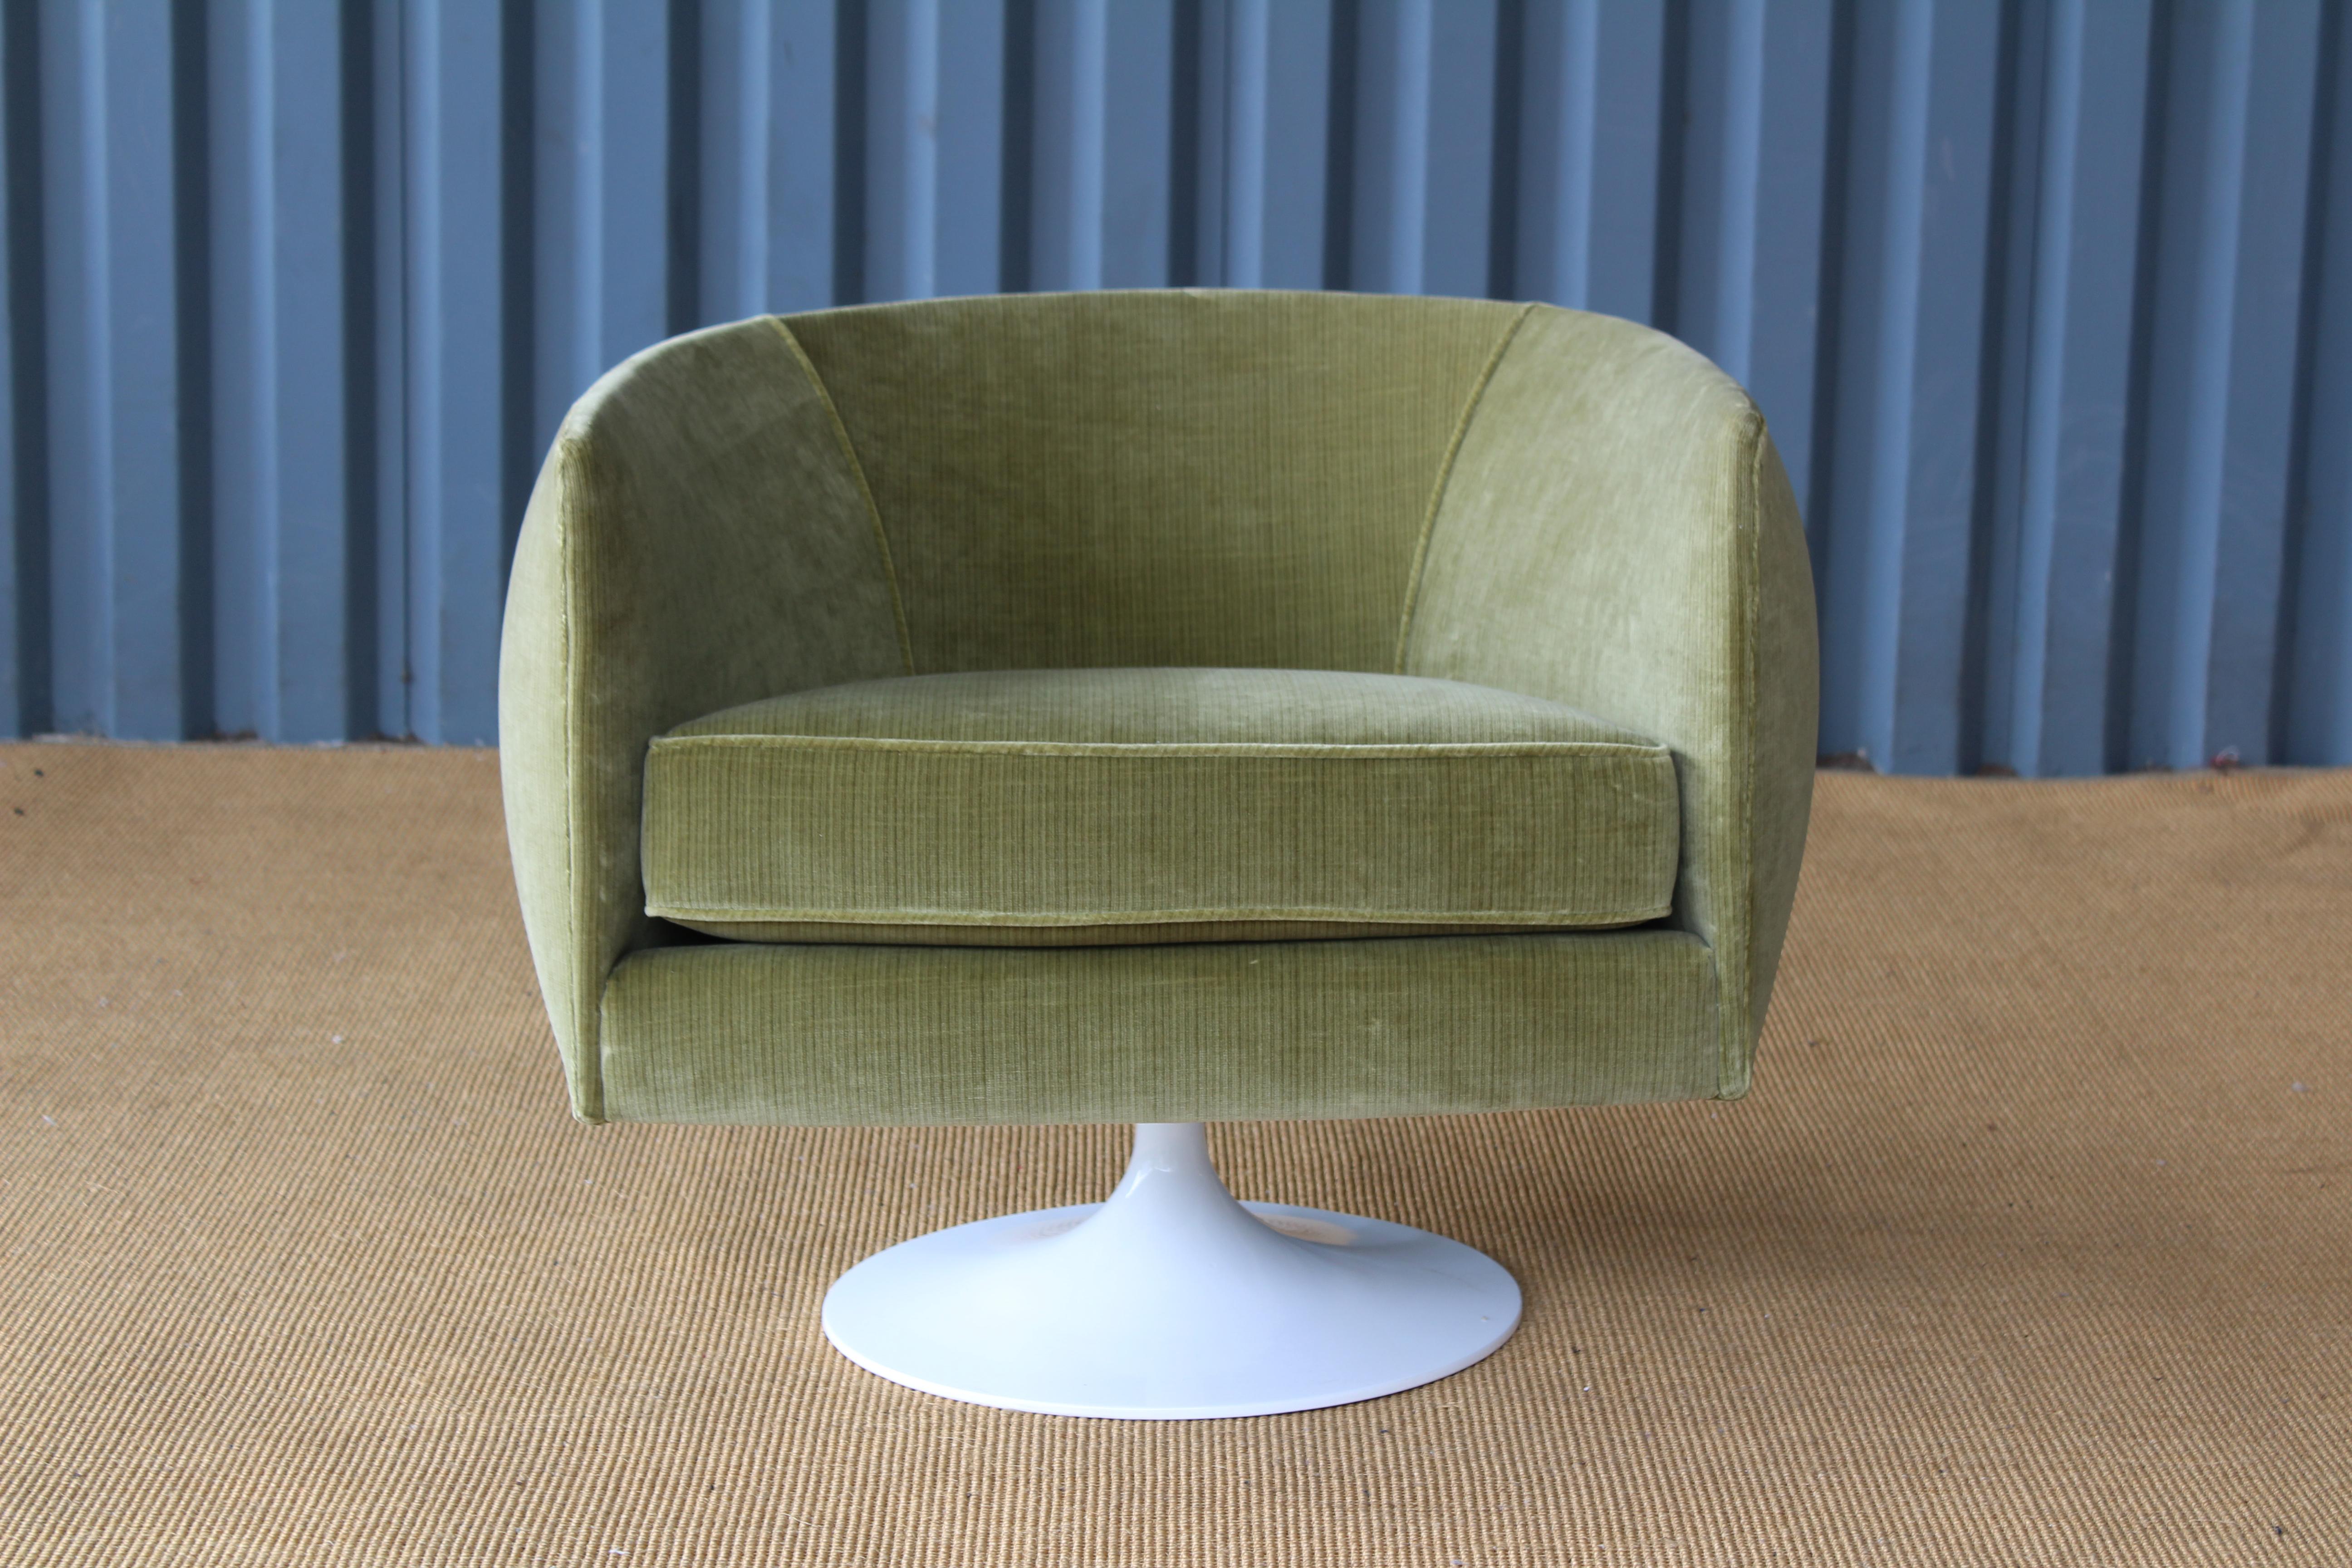 Mid-Century Modern armchair on a swivel base. This chair has been reupholstered in new green striped velvet. The base has been professionally powder-coated white. Includes a small removable lumbar pillow.